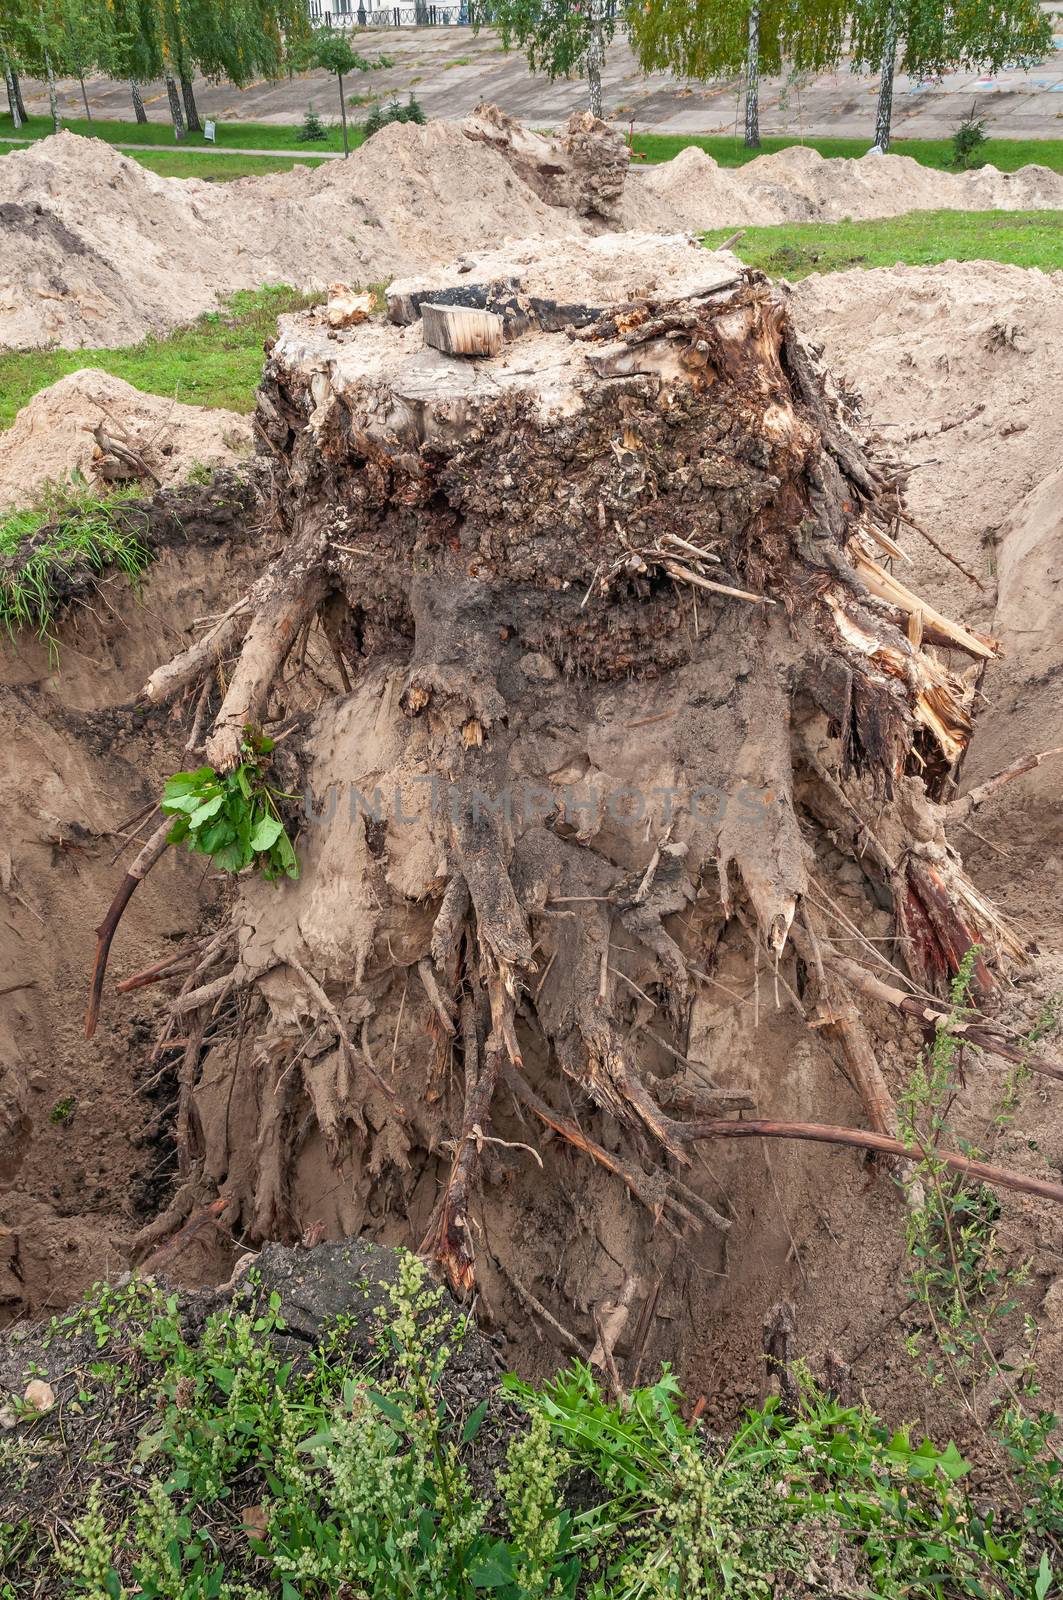 A trench in the ground for laying a pipe in the park. Excavation of a tree stump in sandy soil